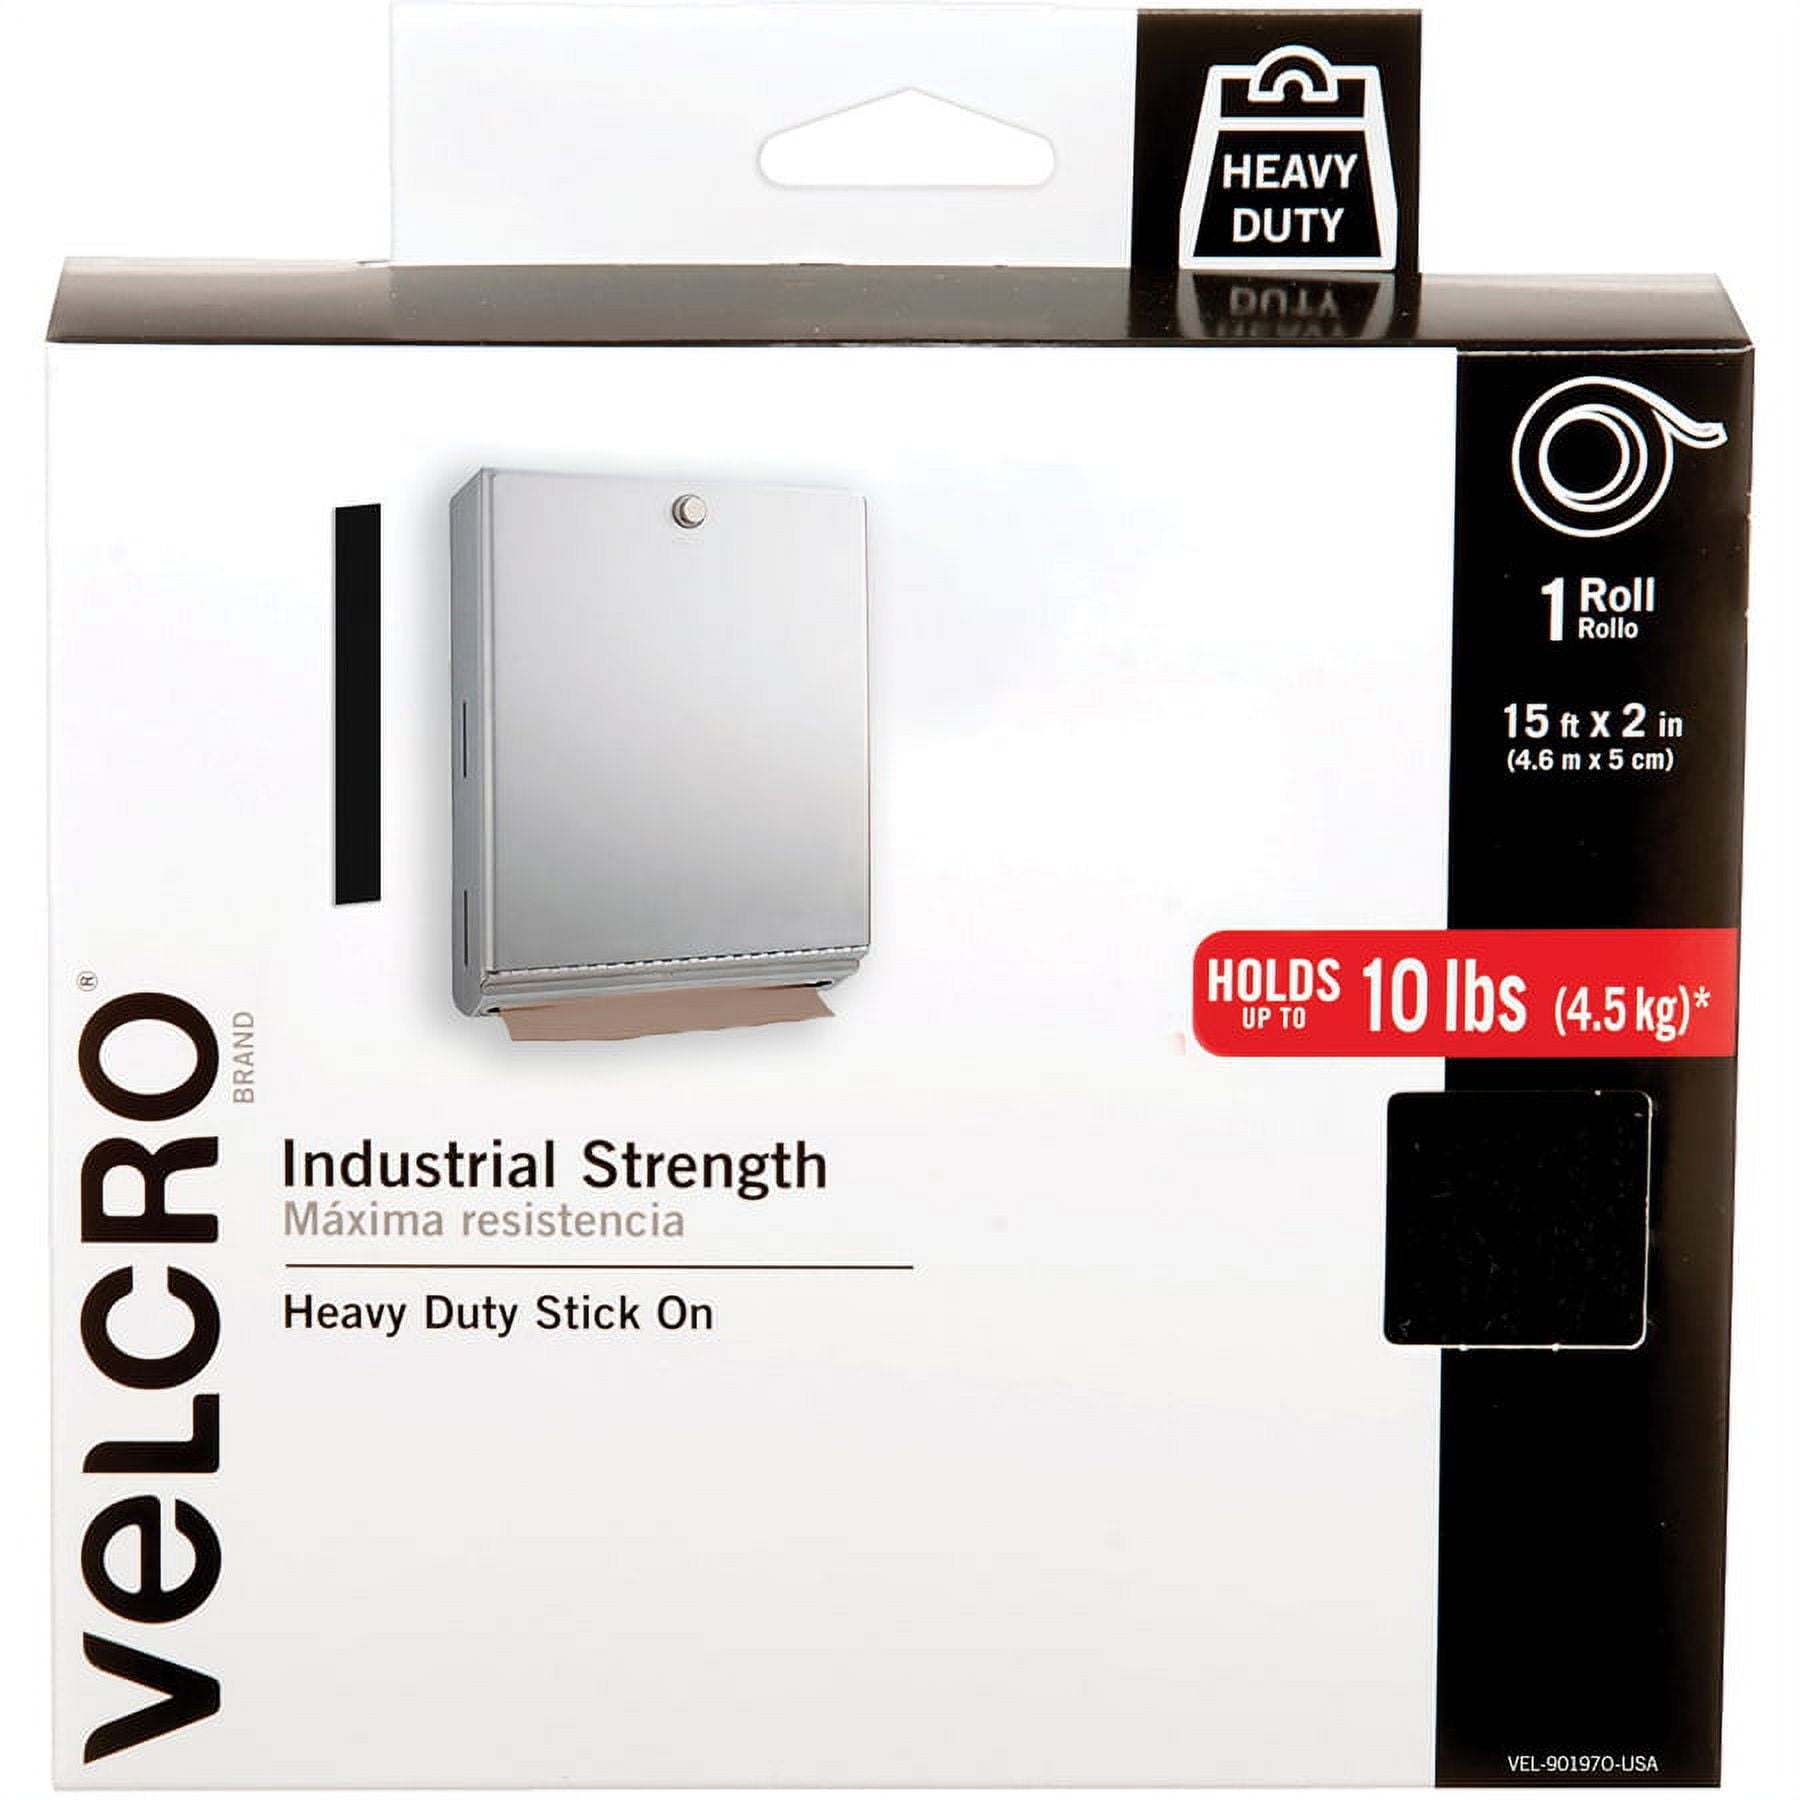 VELCRO Brand Heavy Duty Fasteners | 4x2 Inch Strips 4 Sets | Holds 10 lbs |  Stick-On Adhesive Backed | Black Industrial Strength | For Indoor or